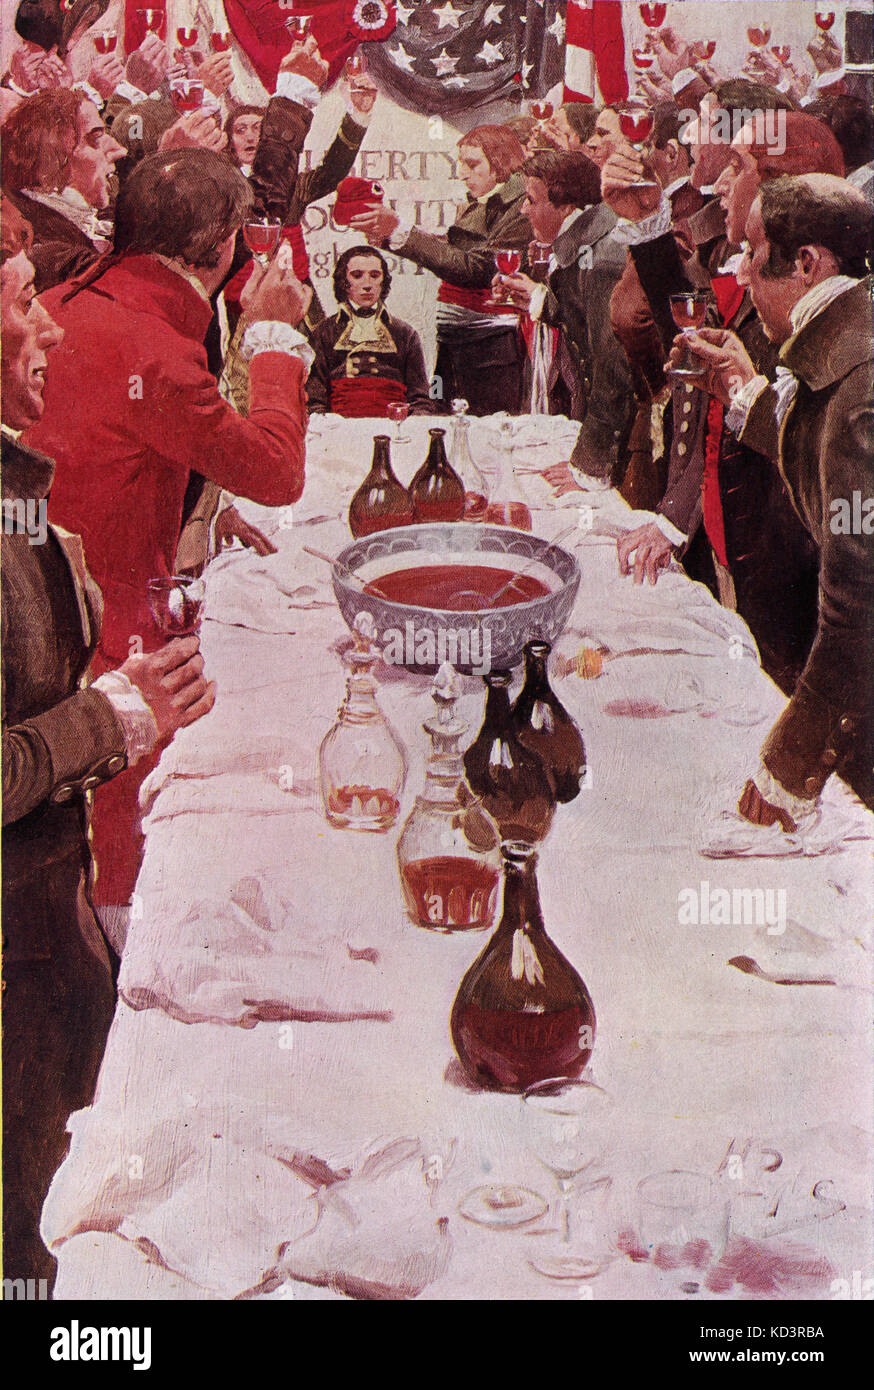 Banquet to Edmond-Charles Genet in South Carolina. Citizen Genet affair, 1793. Edmond-Charles Genêt, appointed French ambassador to the United States during the French Revolution, is received with celebrations by Democrats and Republicans in spite of Washington's neutrality. Illustration by Howard Pyle, 1897 Stock Photo